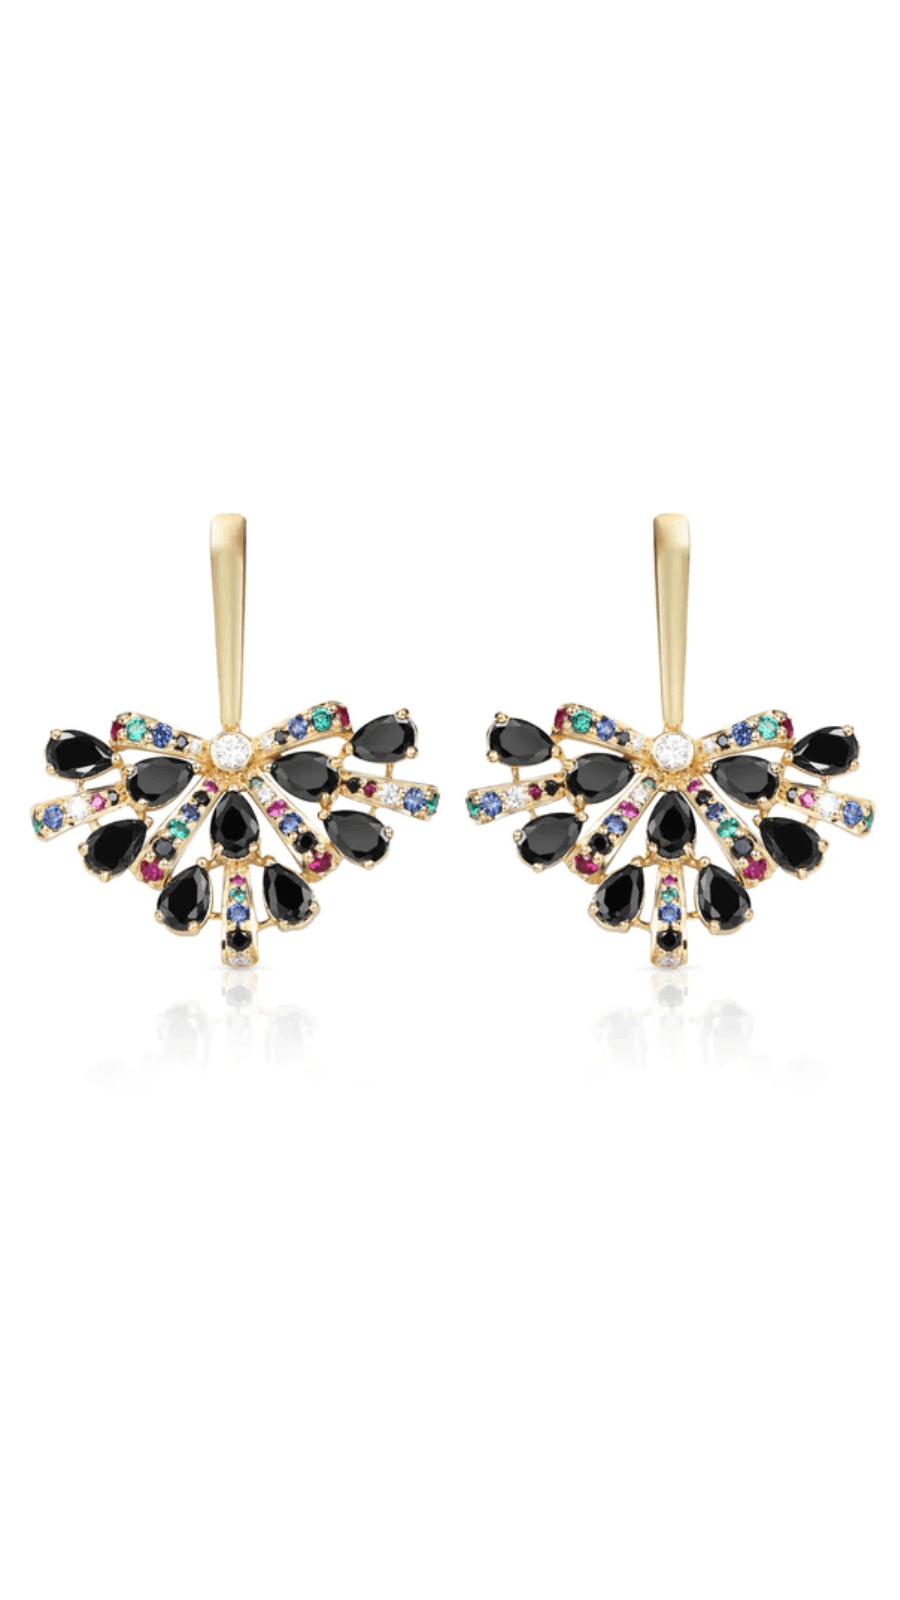 Exquisite Uptown Earrings - Black and Gold